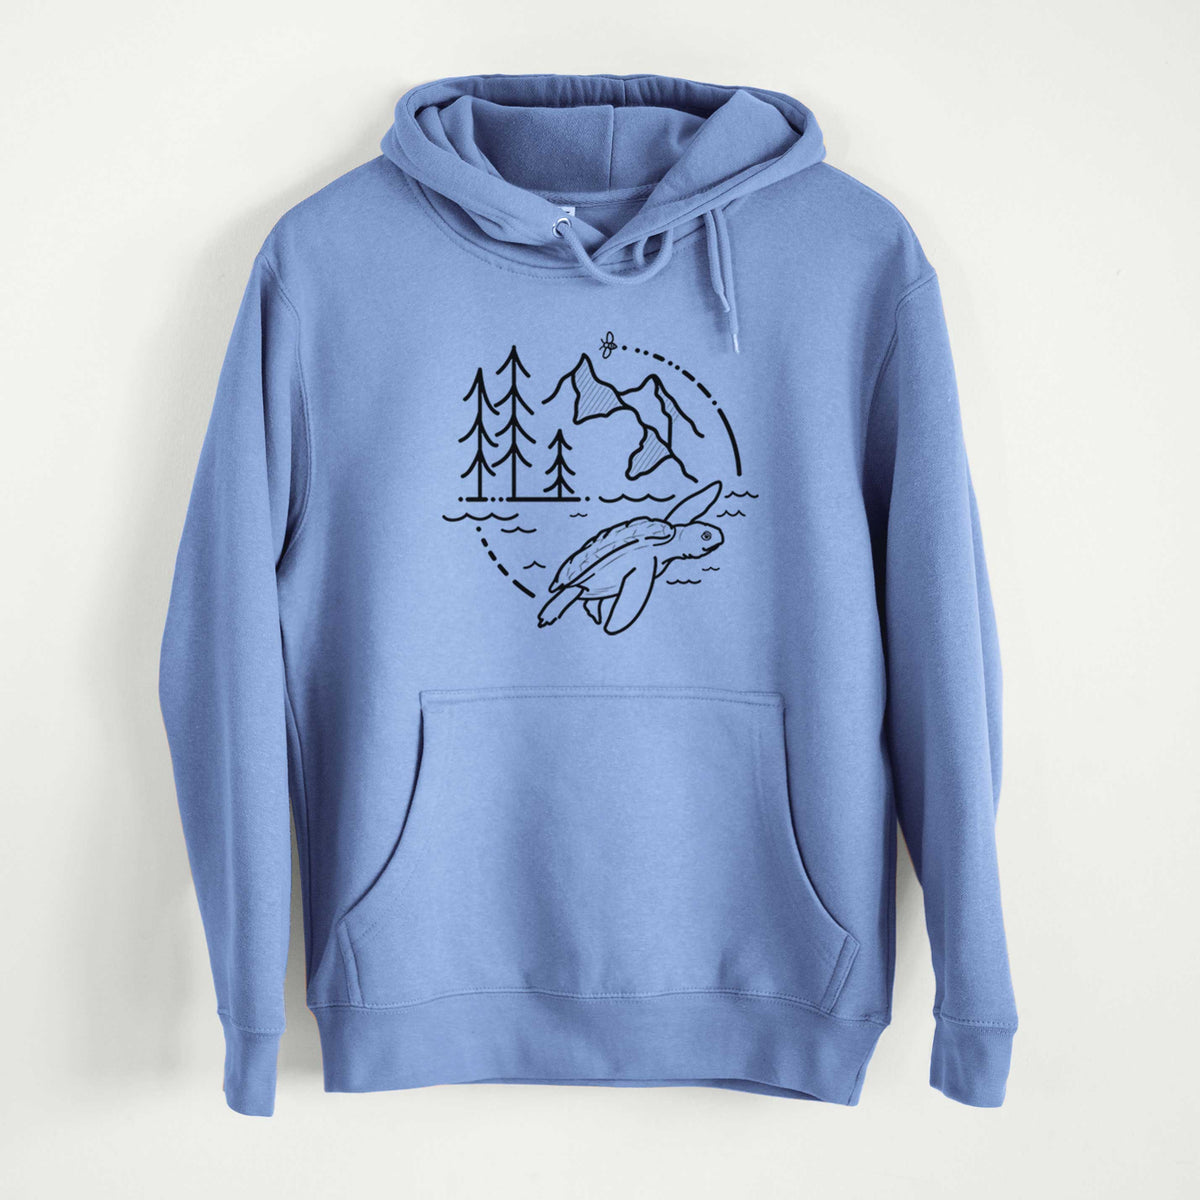 It&#39;s All Connected - Kemps Ridley Turtle  - Mid-Weight Unisex Premium Blend Hoodie